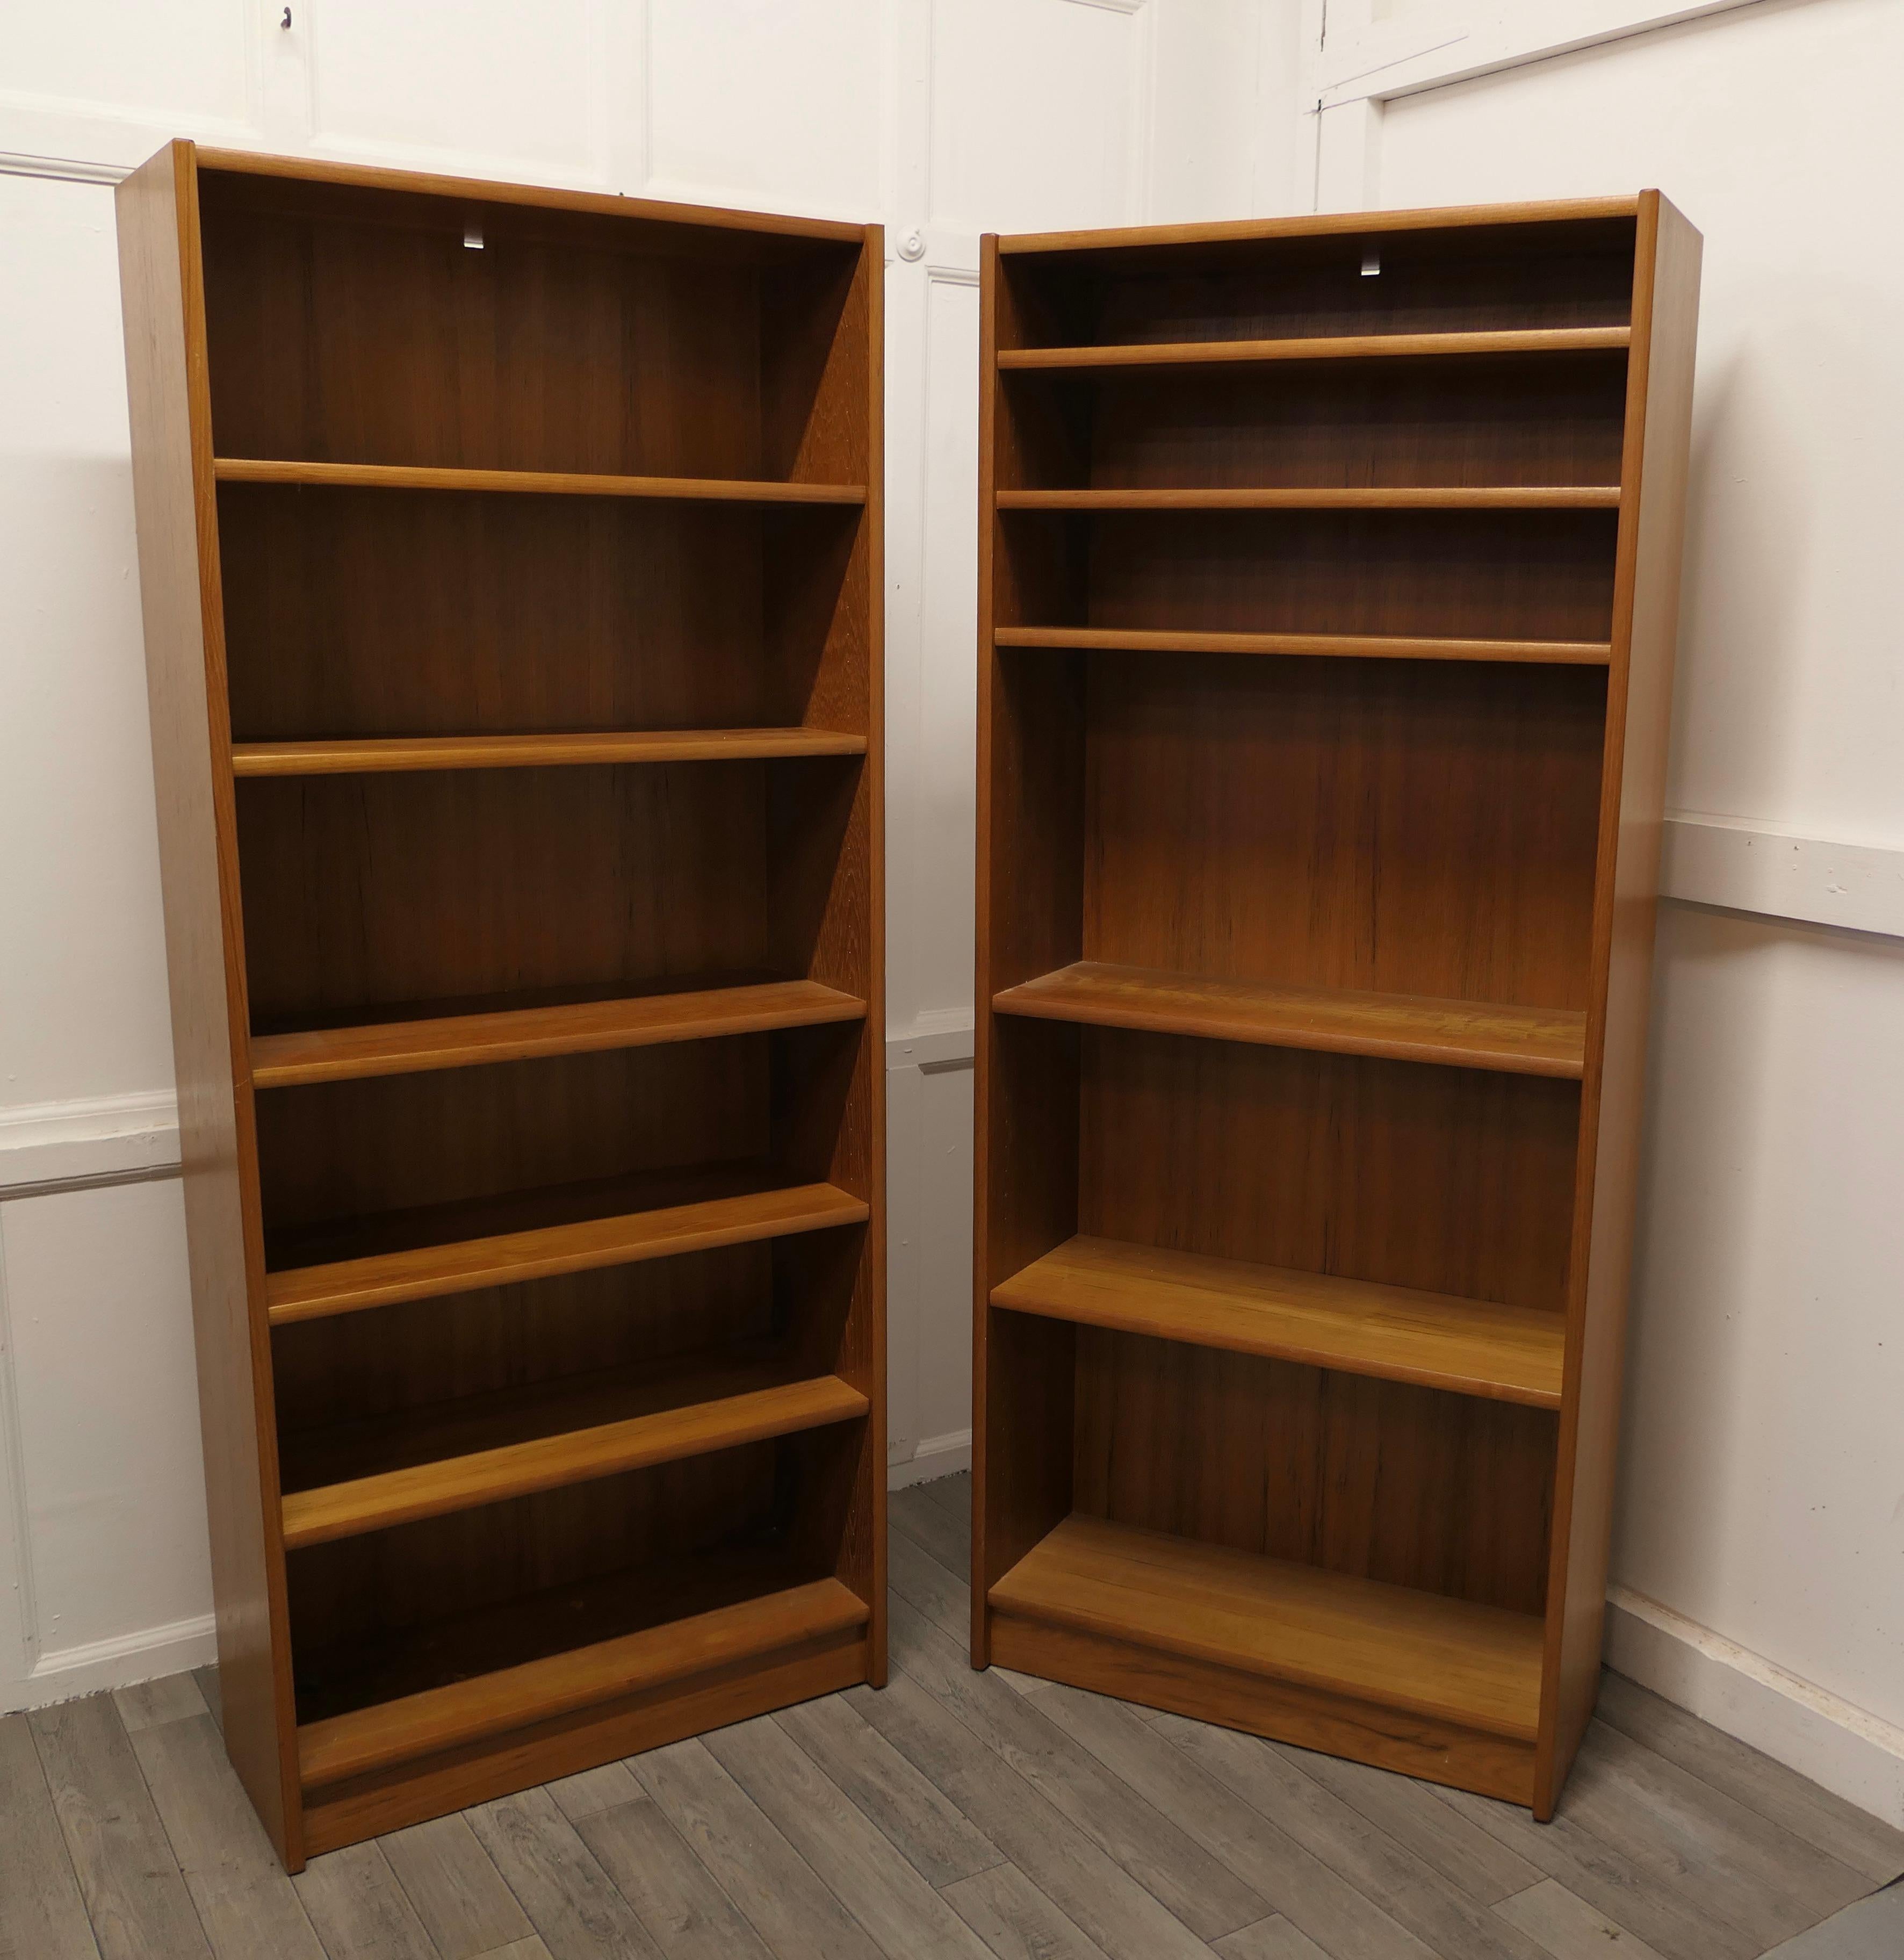 Pair of 1980s vintage tall open book cases in teak finish

This is a classic timeless design the bookcases are sturdy and heavy, they each have 5 adjustable shelves and wooden panelled backs 
All in all 2 very good architectural pieces which will